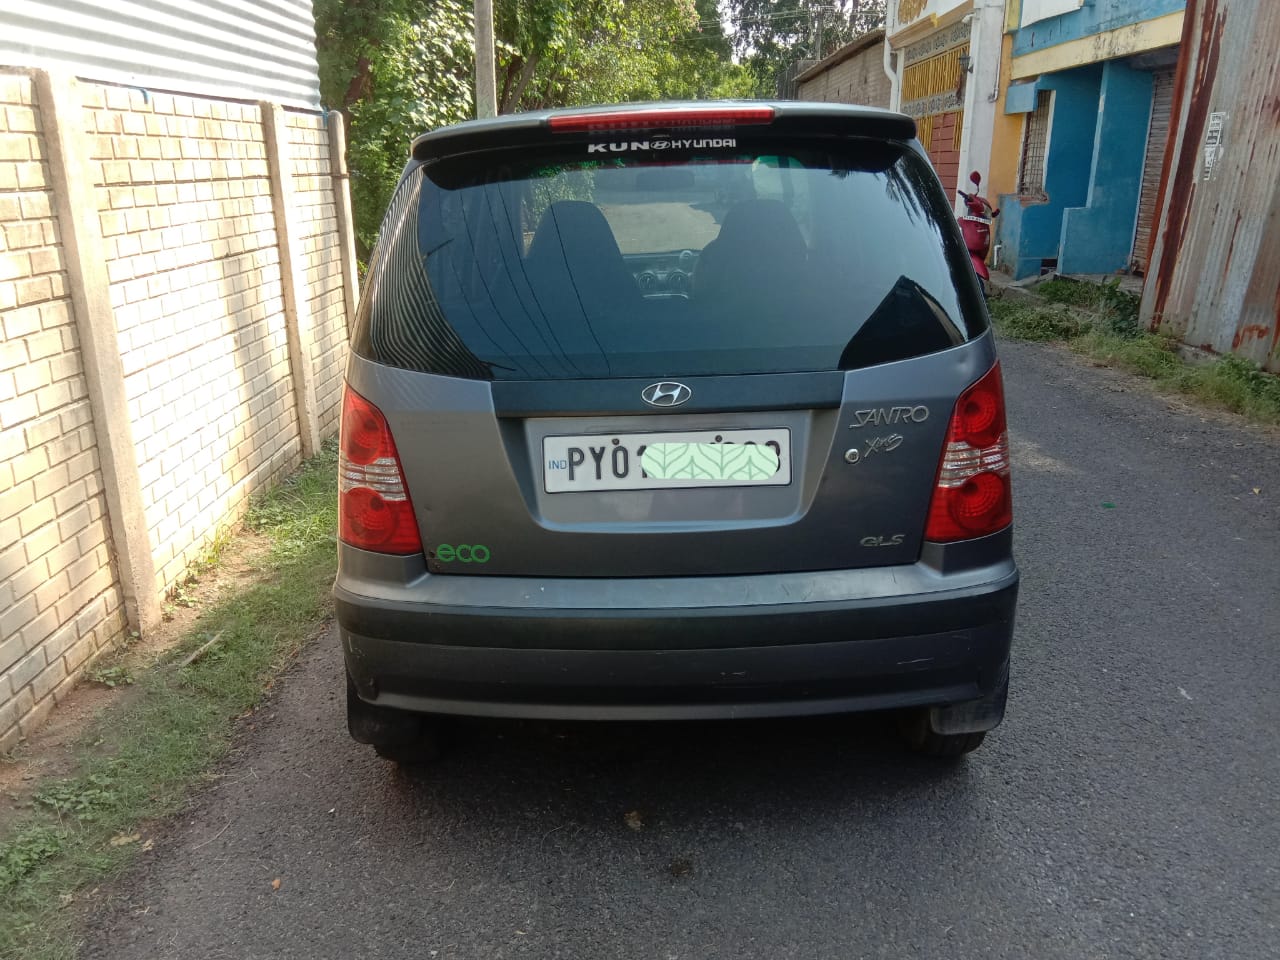 4333-for-sale-Hyundai-Santro-Xing-Petrol-Second-Owner-2011-PY-registered-rs-190000